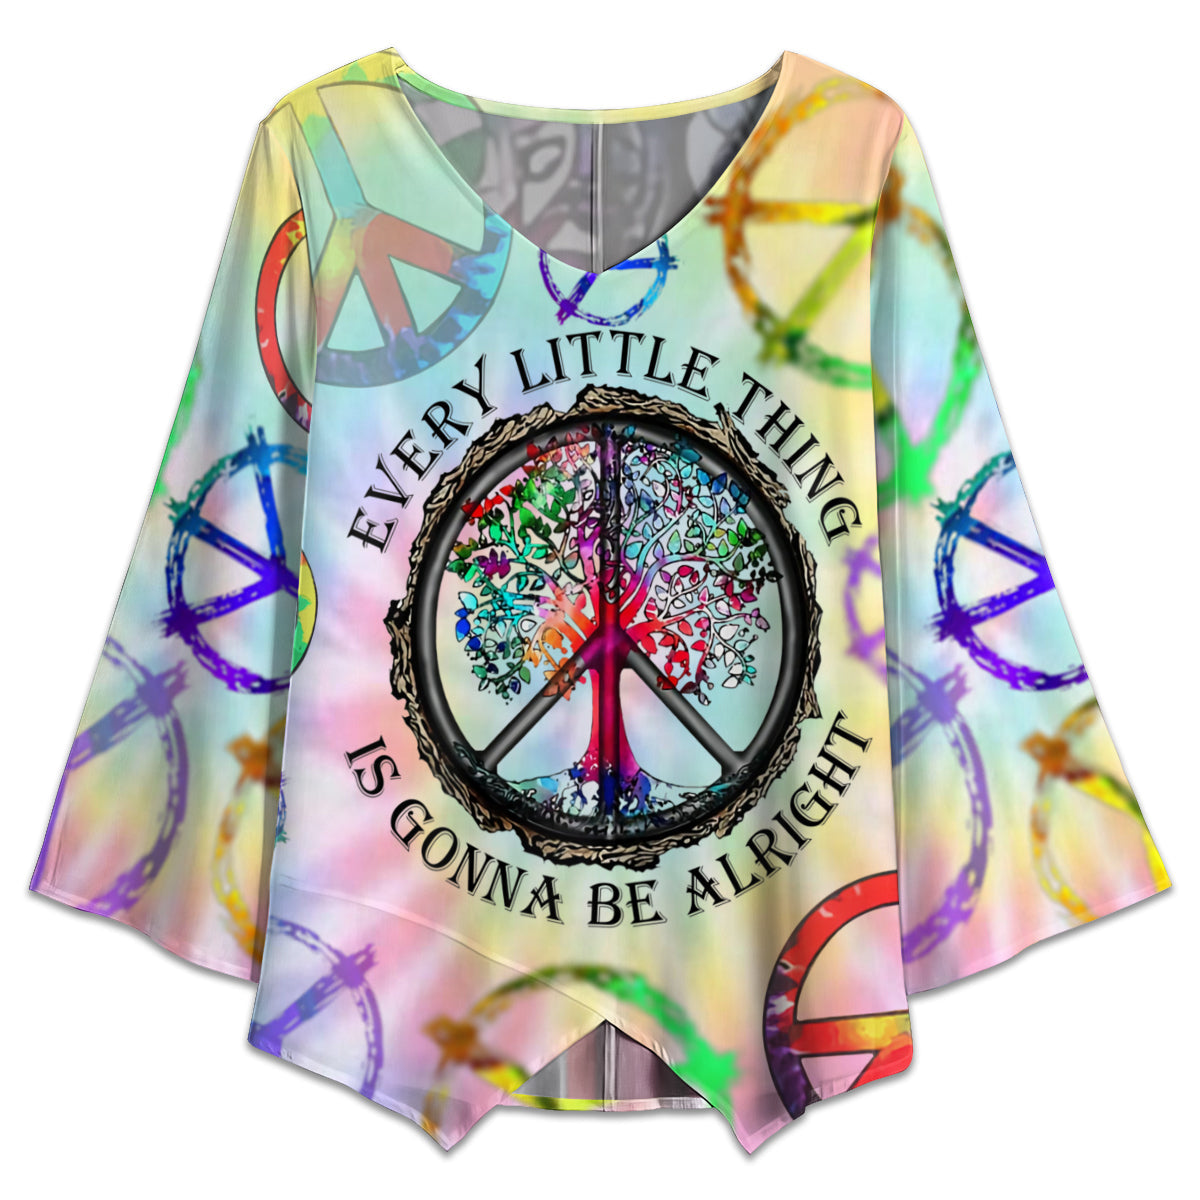 S Hippie Every Little Thing Is Gonna Be Alright - V-neck T-shirt - Owls Matrix LTD